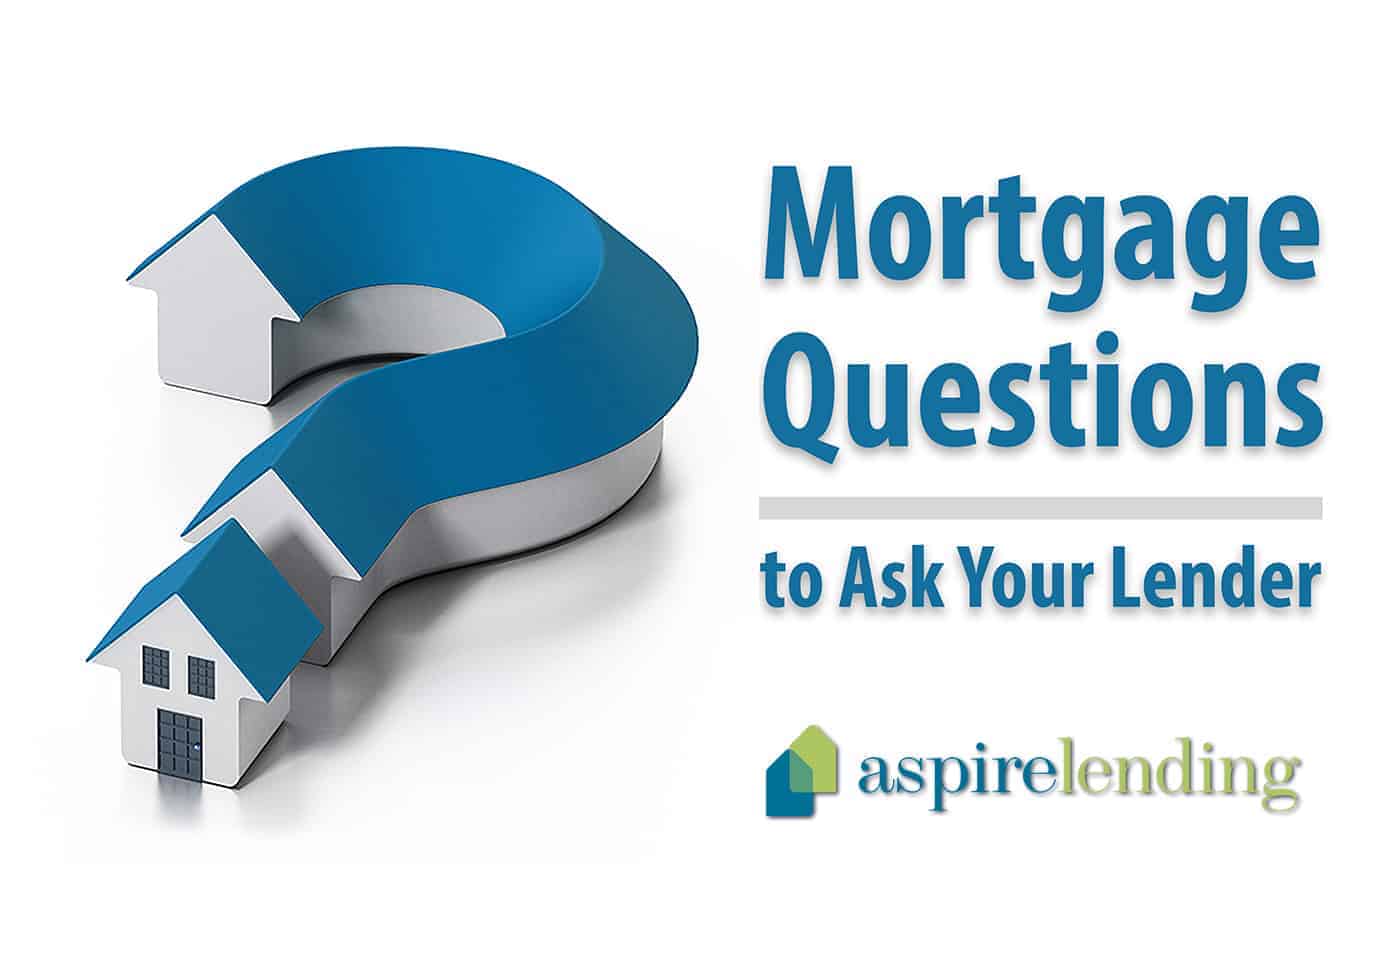 Mortgage questions